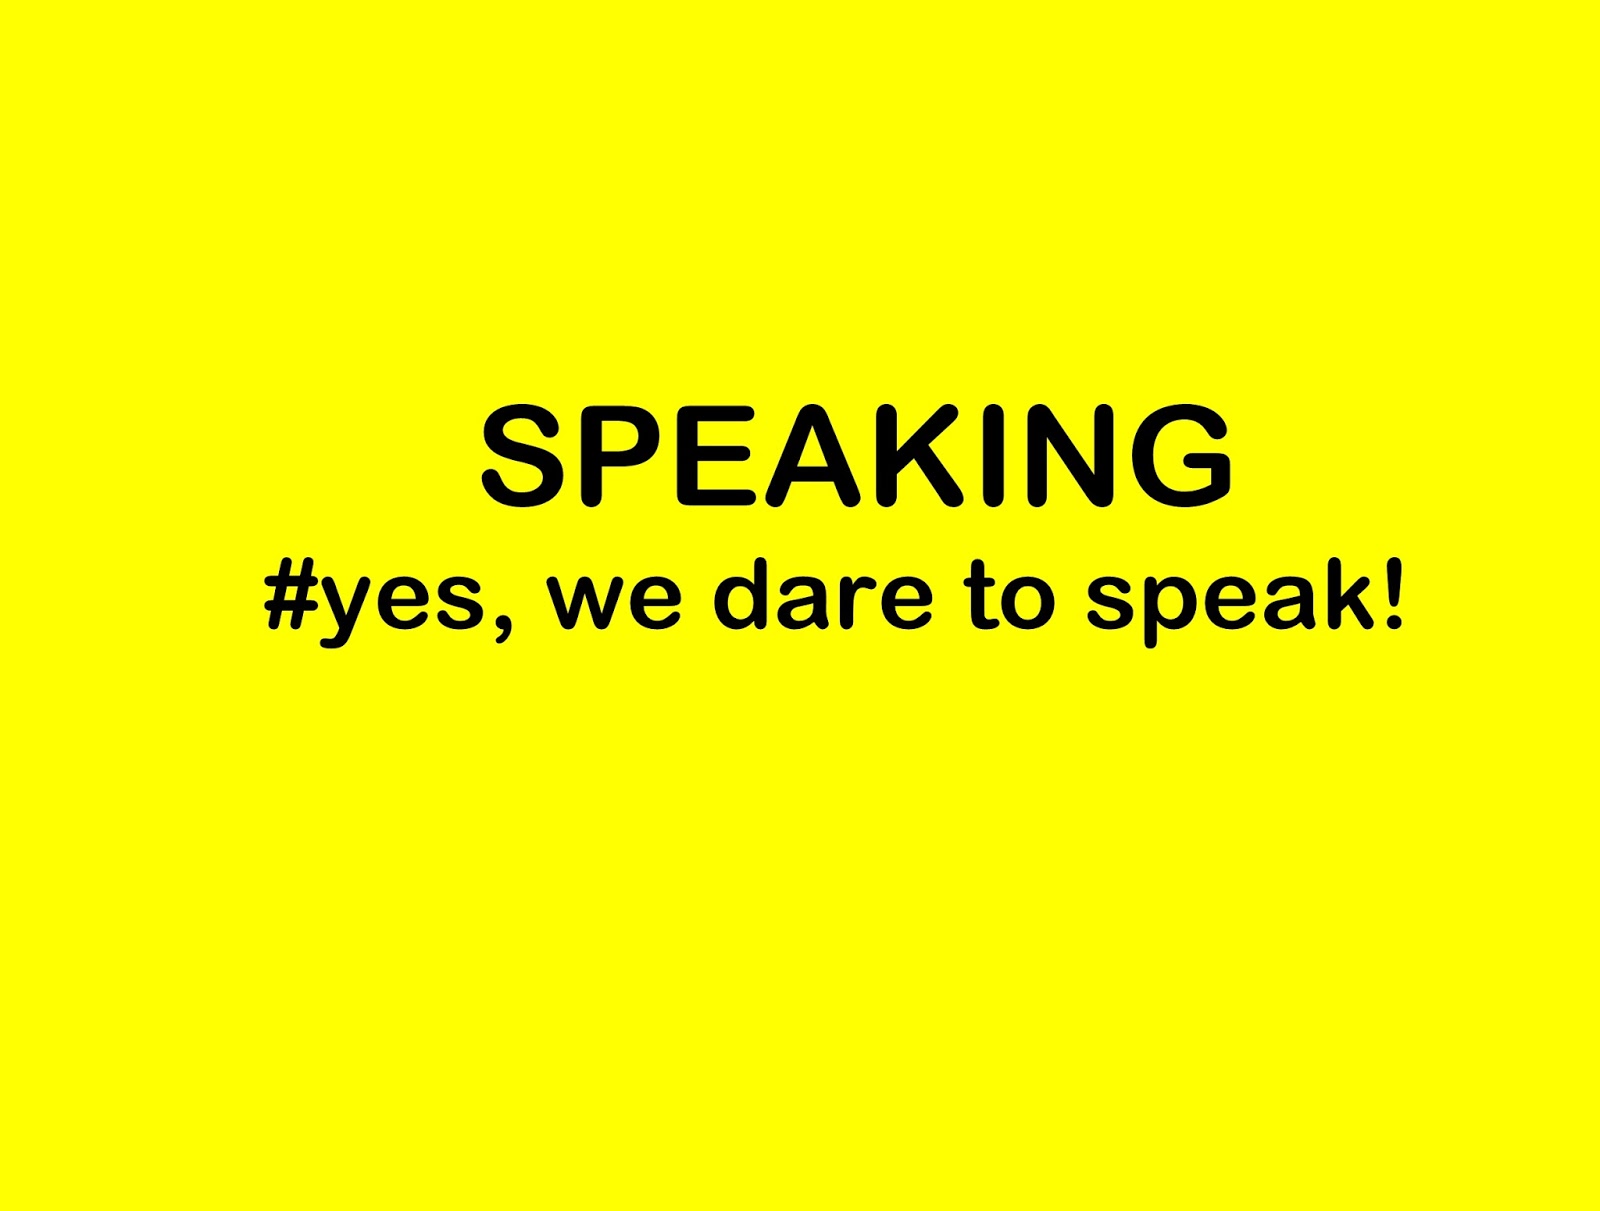 Yes can you speak english. Yes, we Dare..